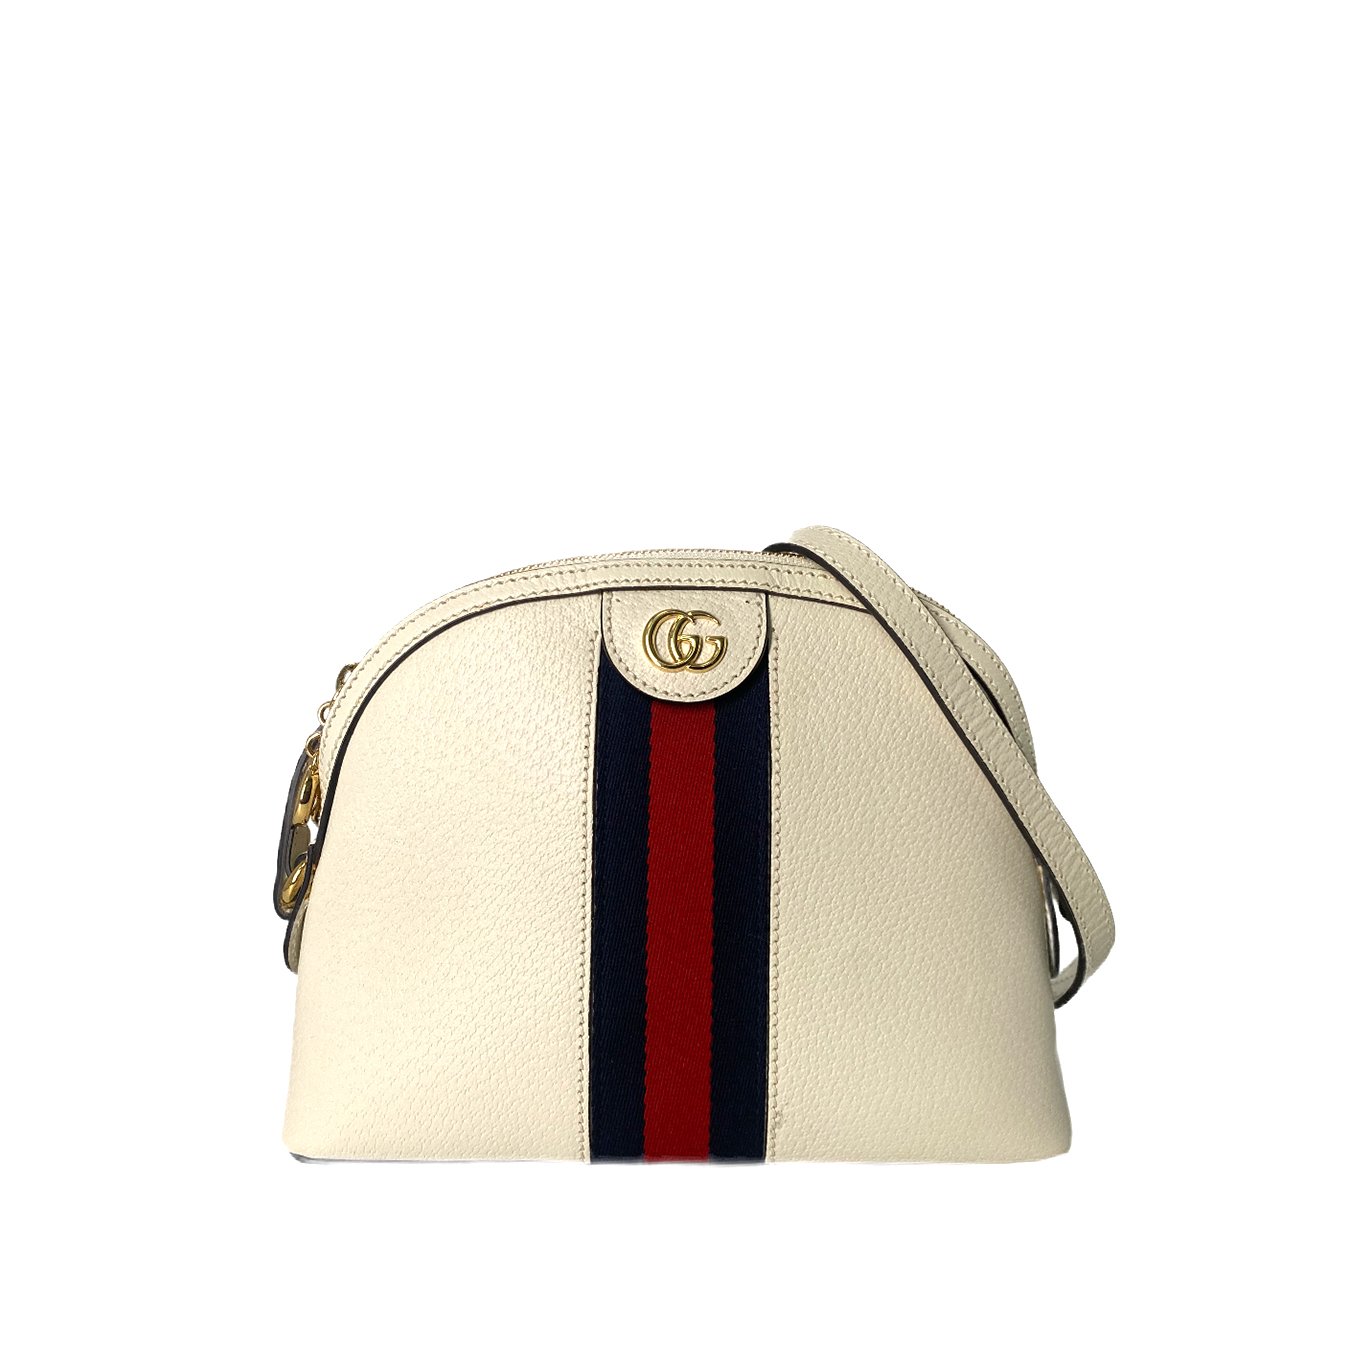 Gucci Ophidia Dome Shoulder Bag Leather Small White